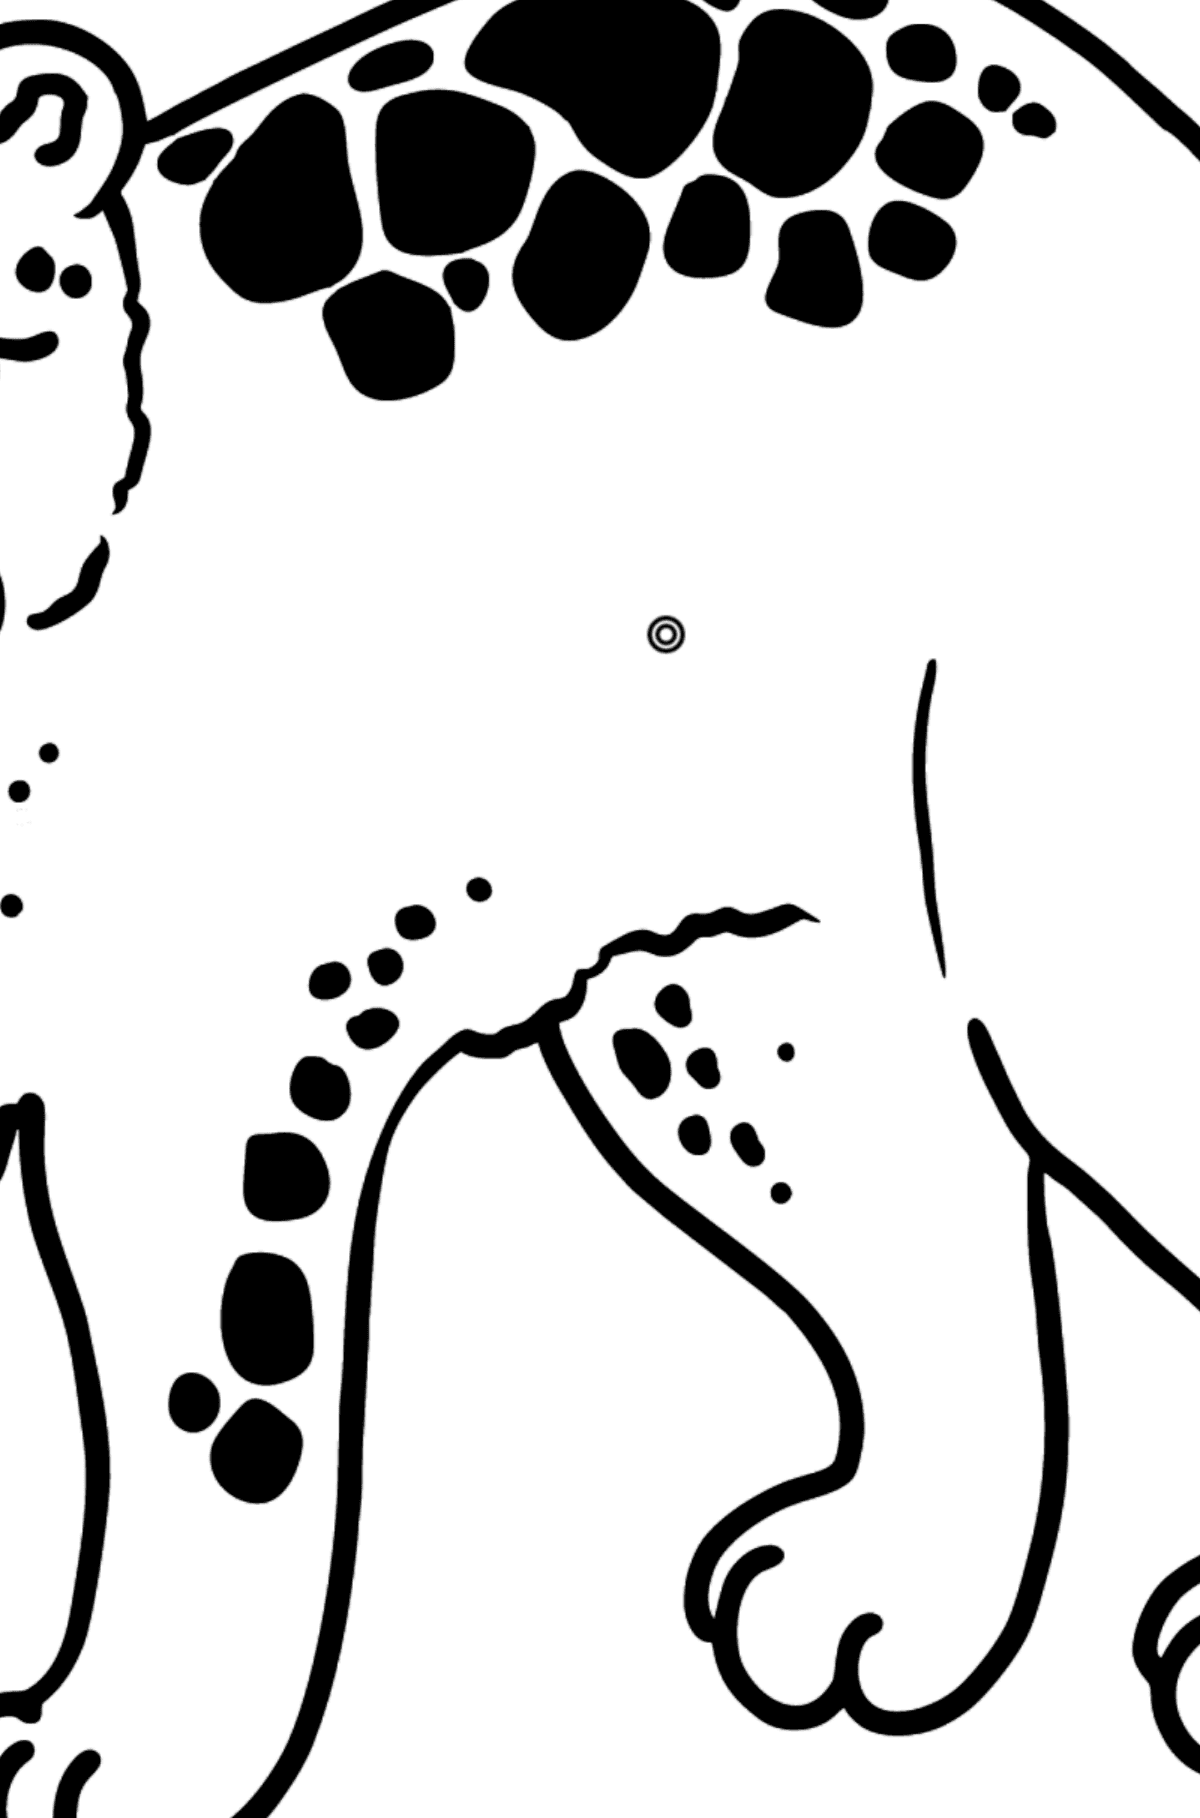 Jaguar coloring page - Coloring by Geometric Shapes for Kids